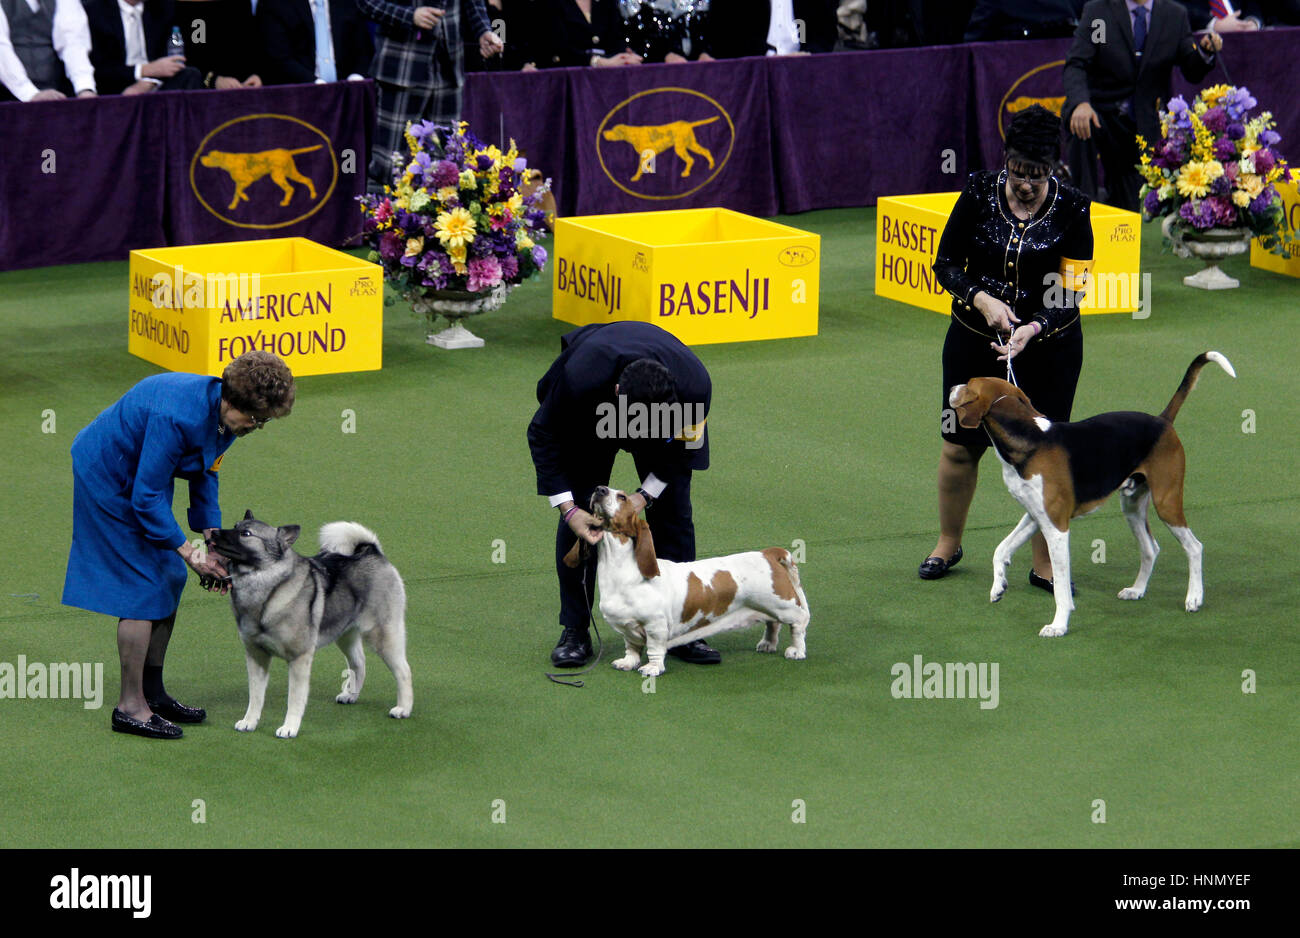 New York, United States. 13th Feb, 2017. Owners tend to their dogs during competition in the Hound Division at the 141st Annual Westminster Dog Show at Madison Square Garden in New York City on February 13th, 2017. Shown here from left to right are the winner of the division, "Duffie", a Norwegian Elkhound, A Basset Hound and an English Fox Hound Credit: Adam Stoltman/Alamy Live News Stock Photo